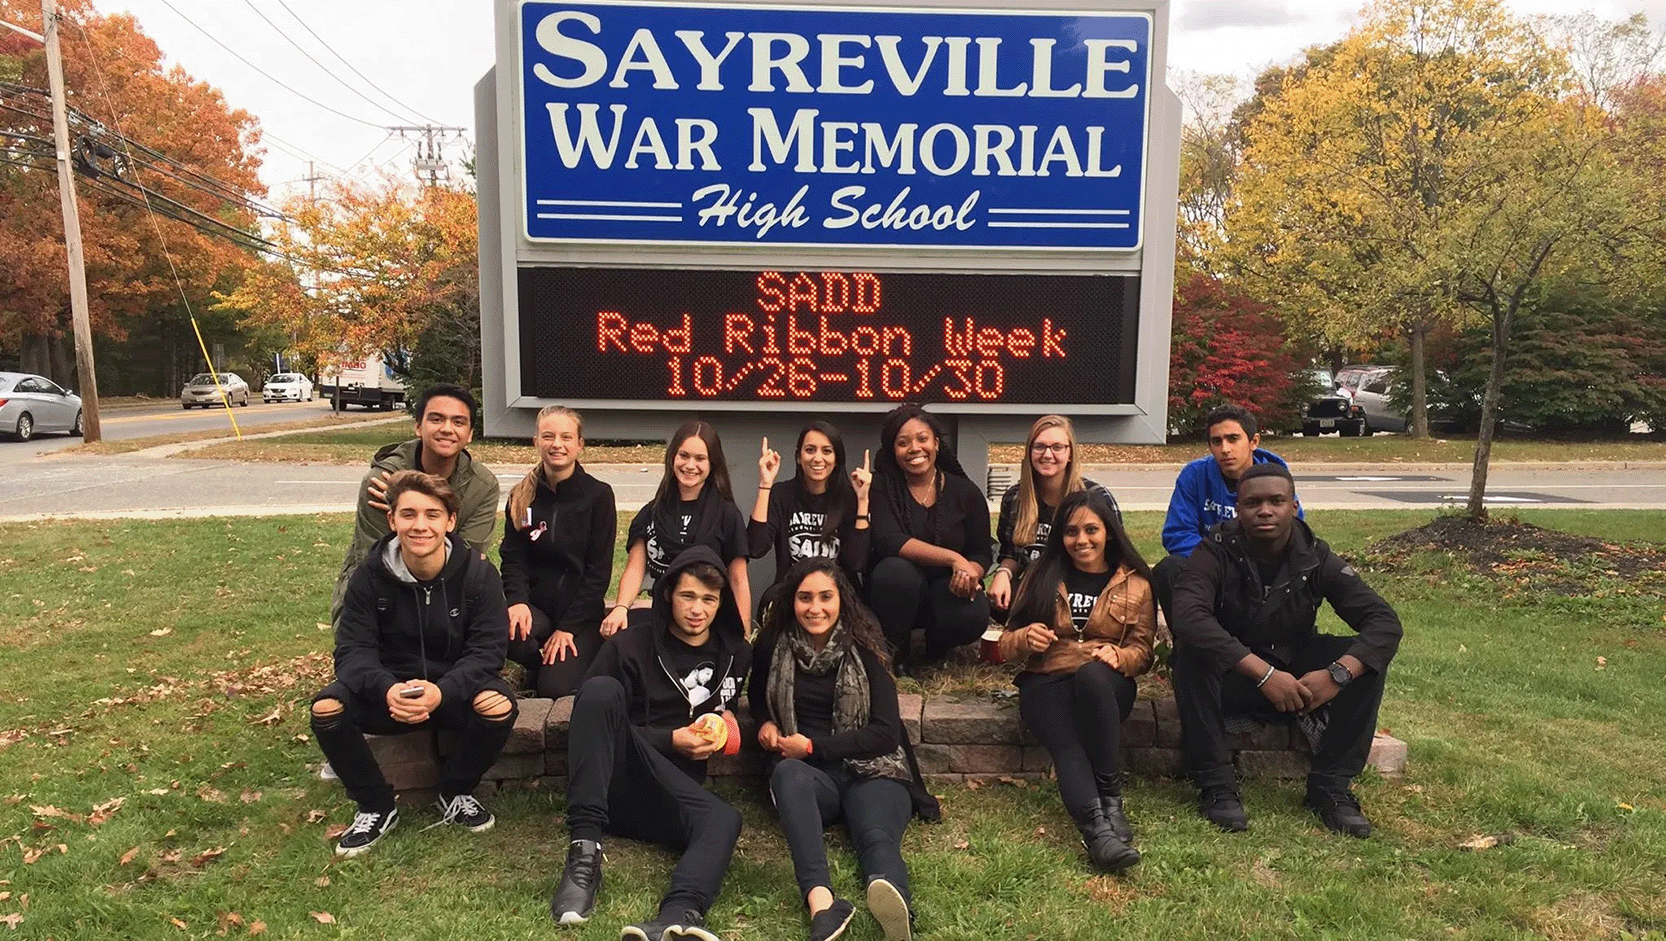 Sayreville Students in front of school sign